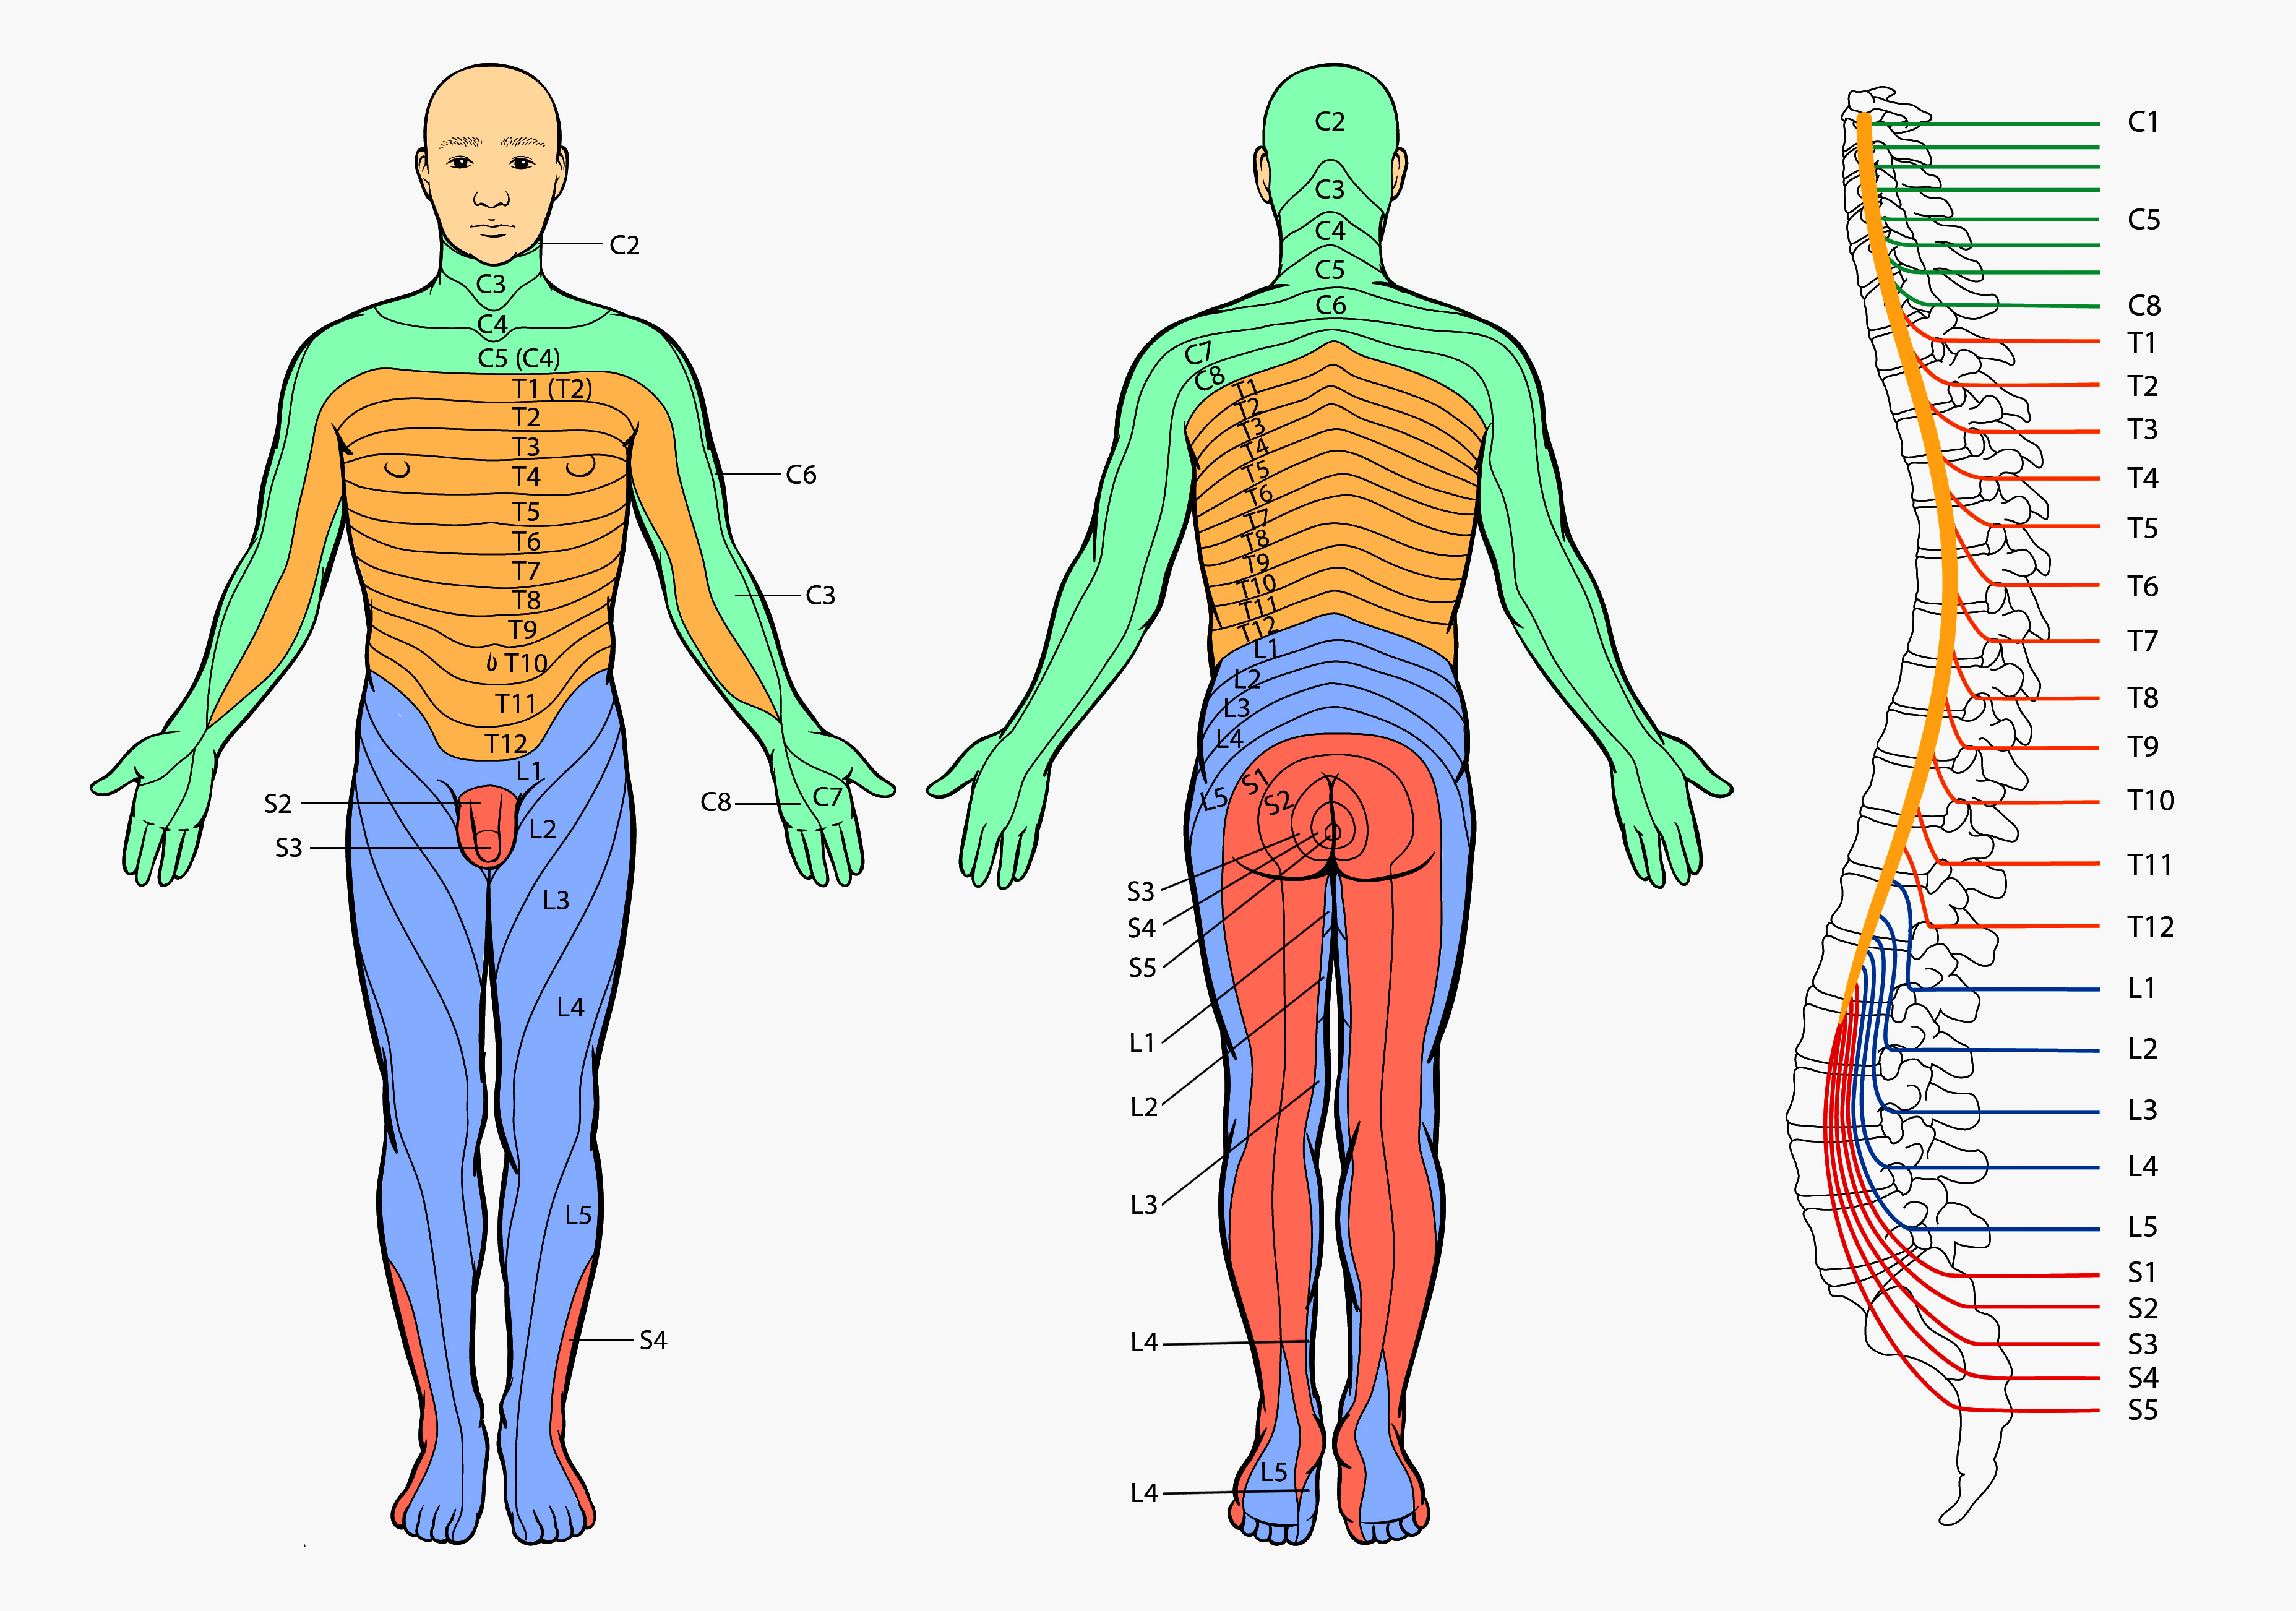 full body dermatome areas. Shows where pain is caused by which dermatomes